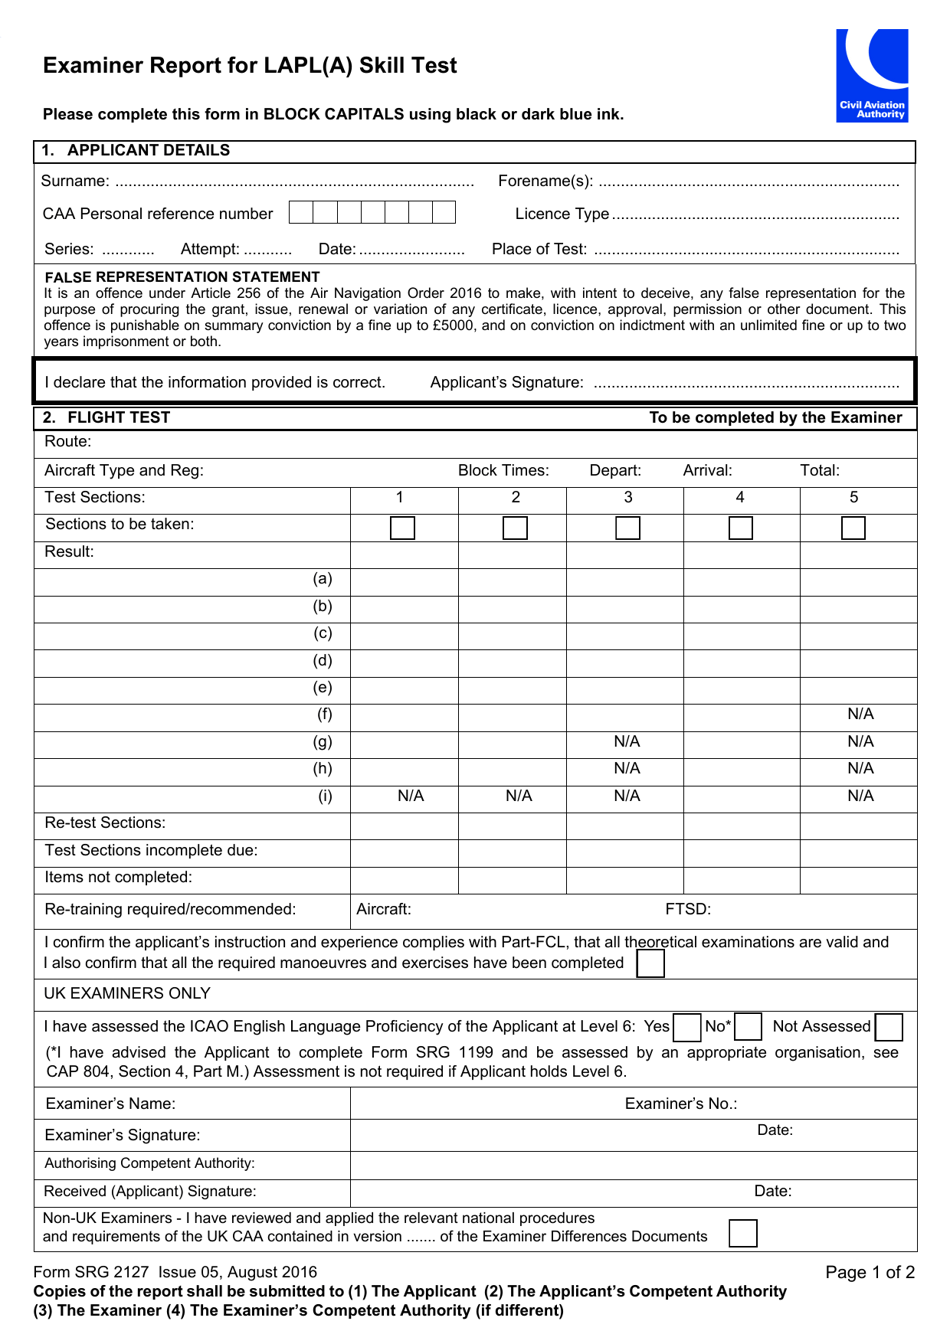 Form SRG2127 Examiner Report for Lapl(A) Skill Test - United Kingdom, Page 1